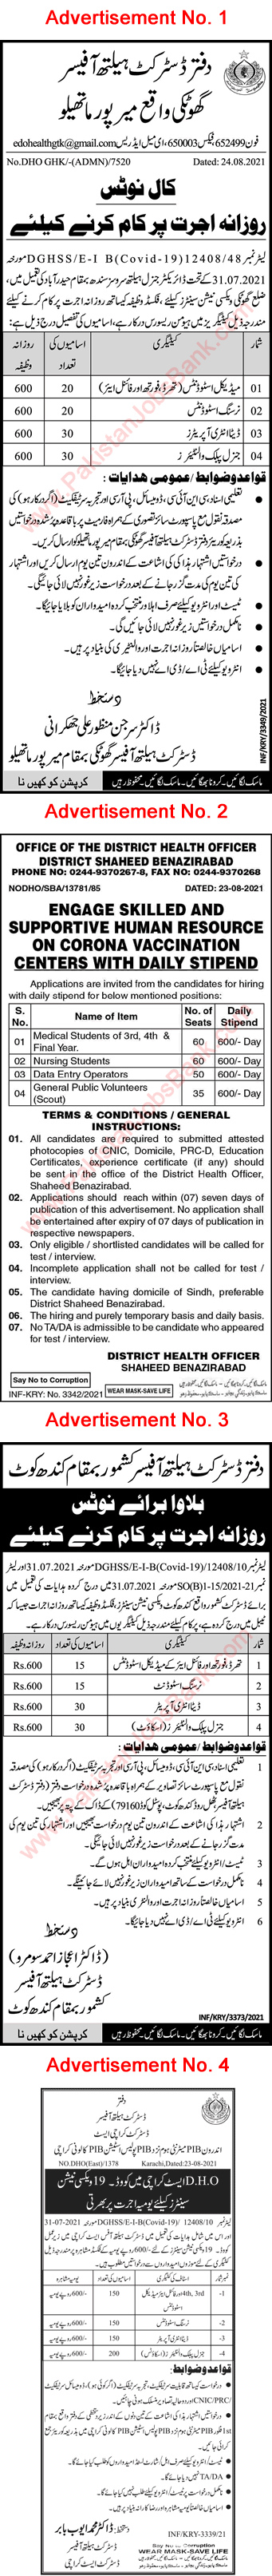 Health Department Sindh Jobs August 2021 Nursing / Medical Students, Data Entry Operators & Others Latest